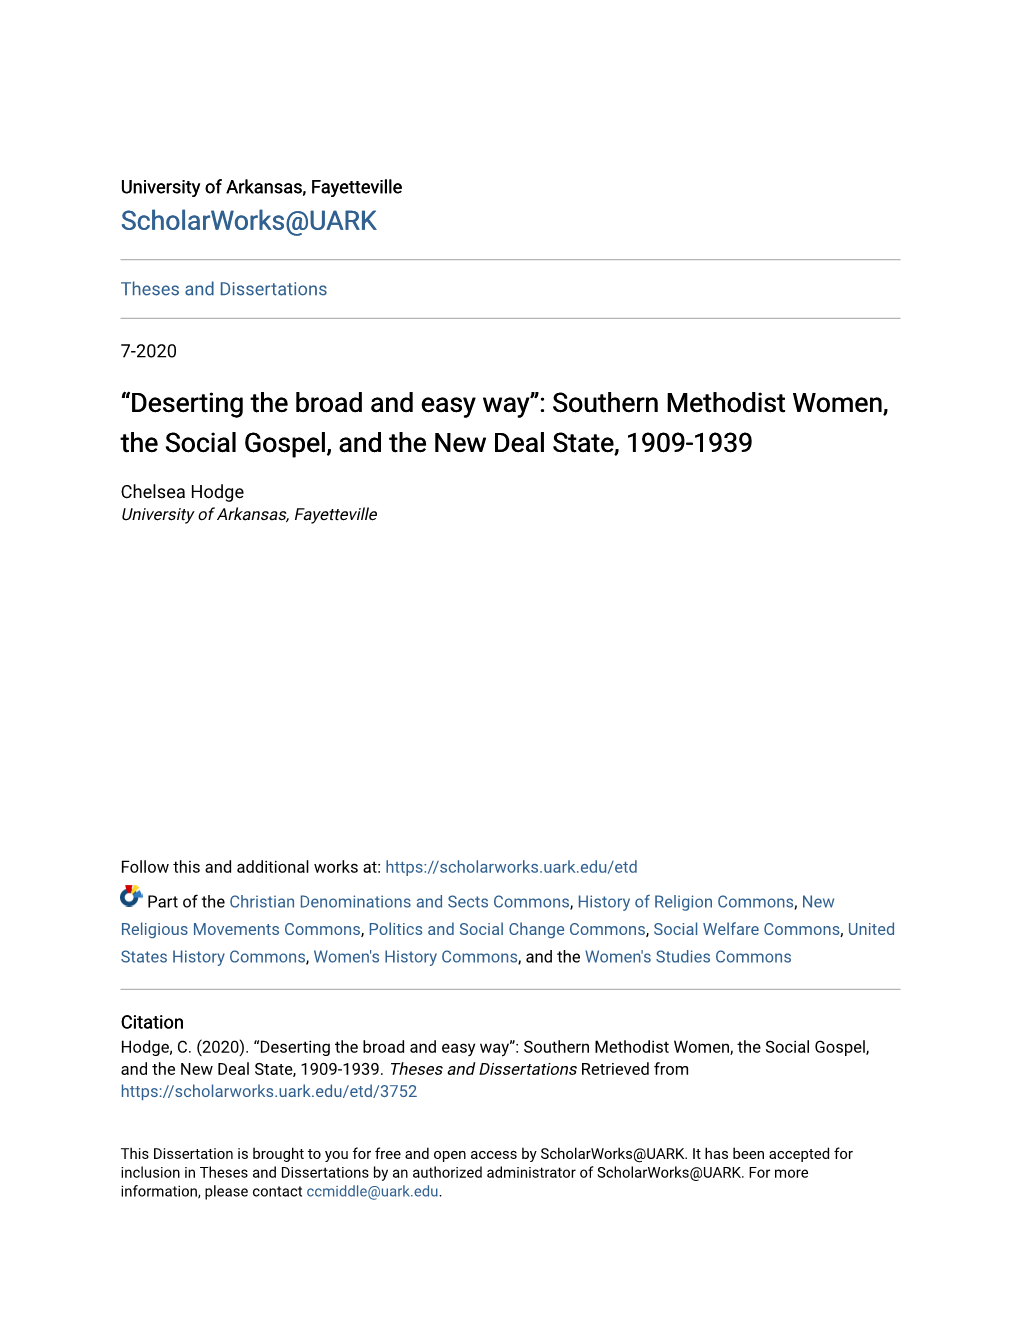 Southern Methodist Women, the Social Gospel, and the New Deal State, 1909-1939